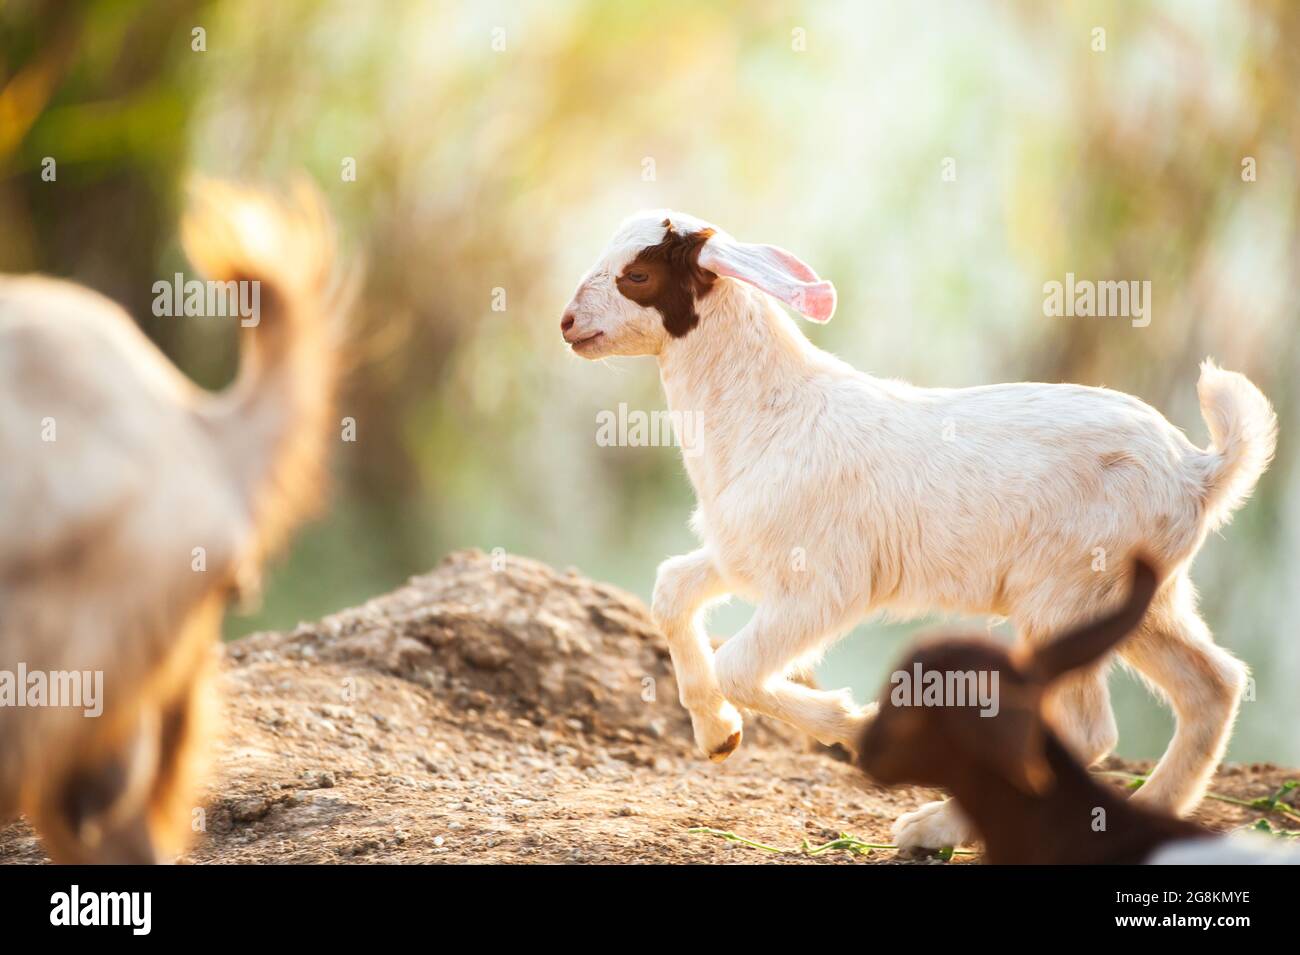 A herd of white goats kids running on a pasture at sunrise. Domestic goat. Stock Photo